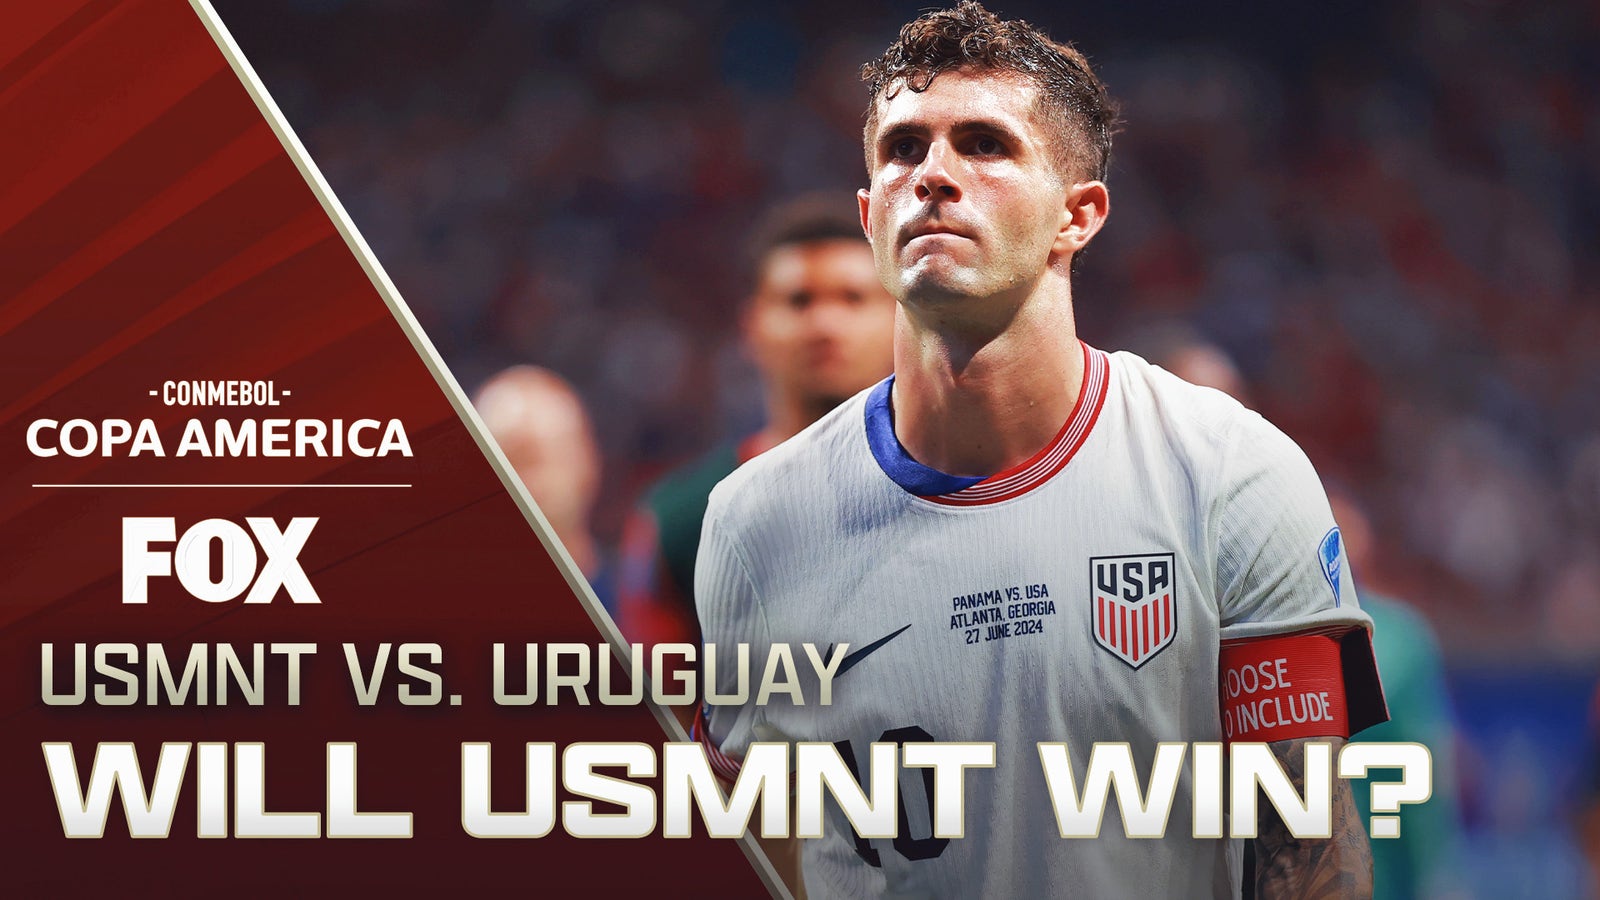 USMNT vs. Uruguay final preview: Can the U.S. pull out the victory?